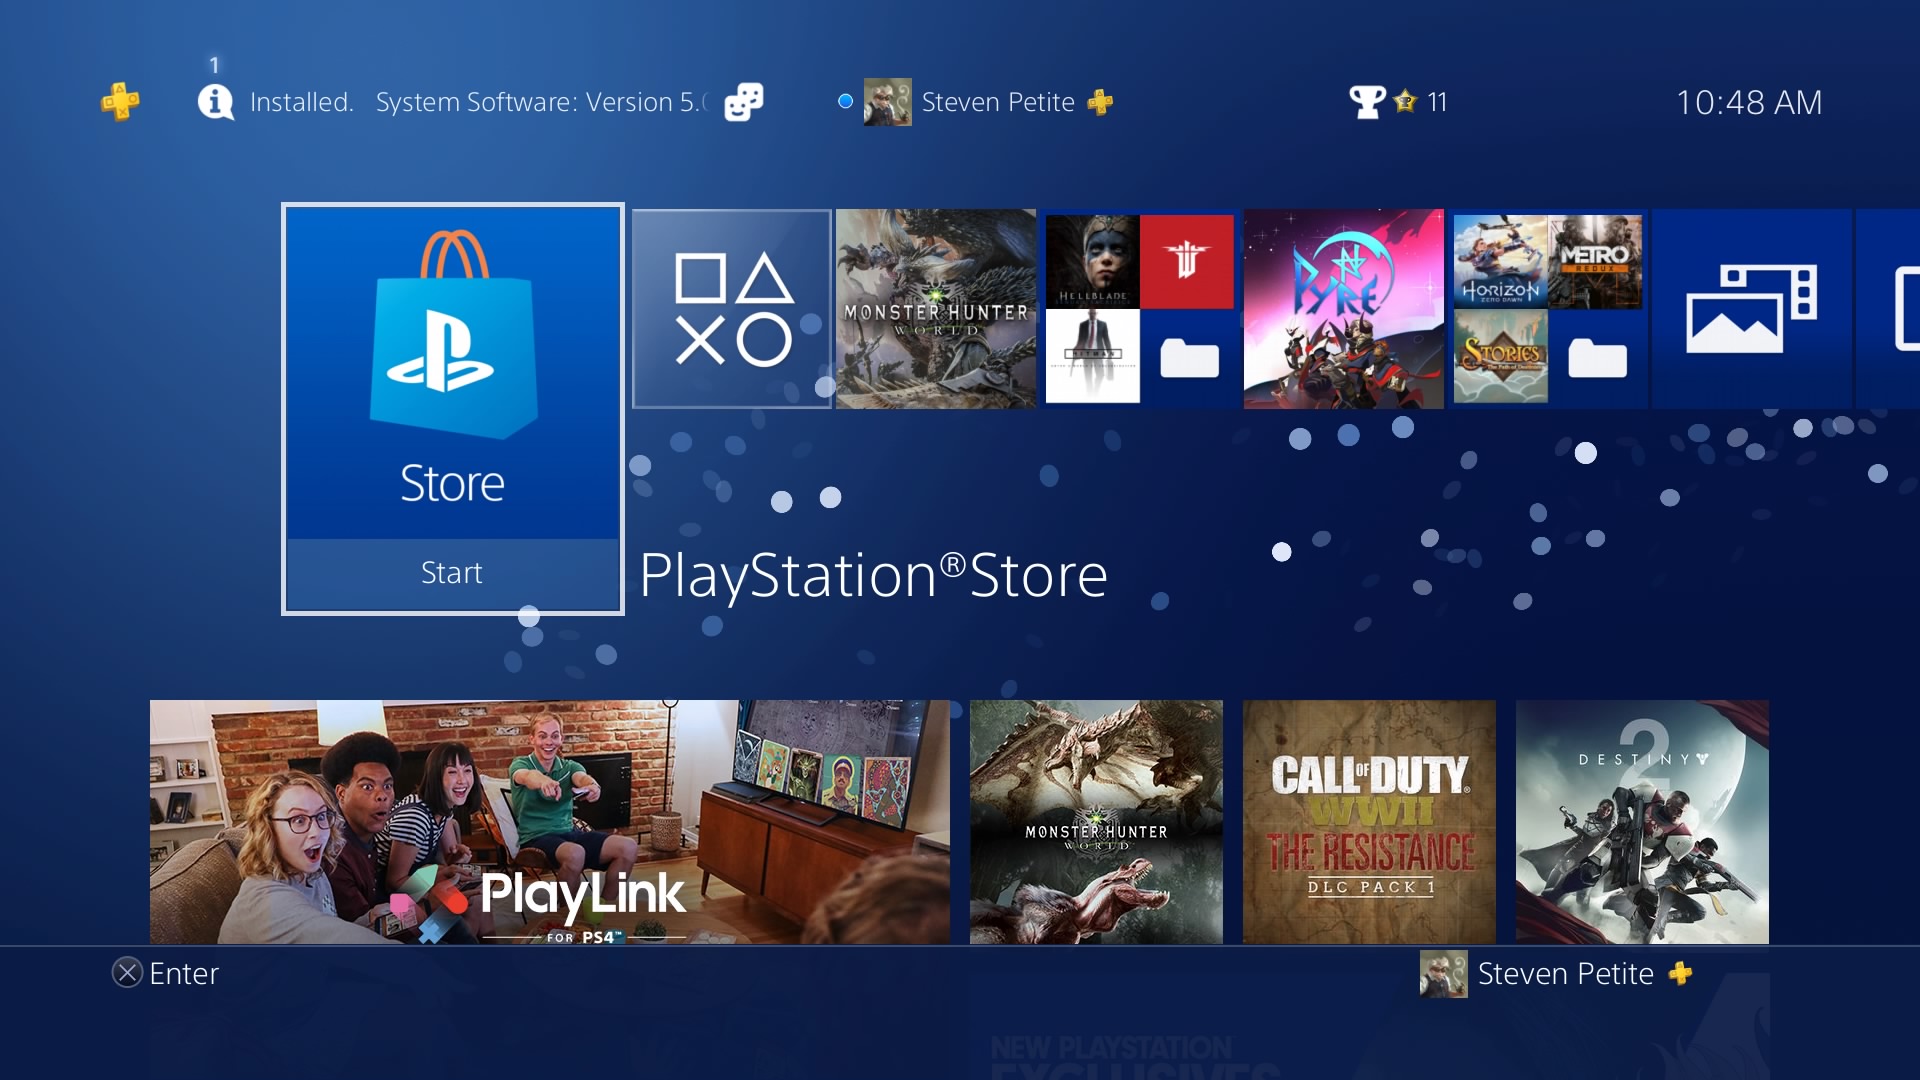 How to redeem a code on a PS5 - digital game and voucher codes - PC Guide